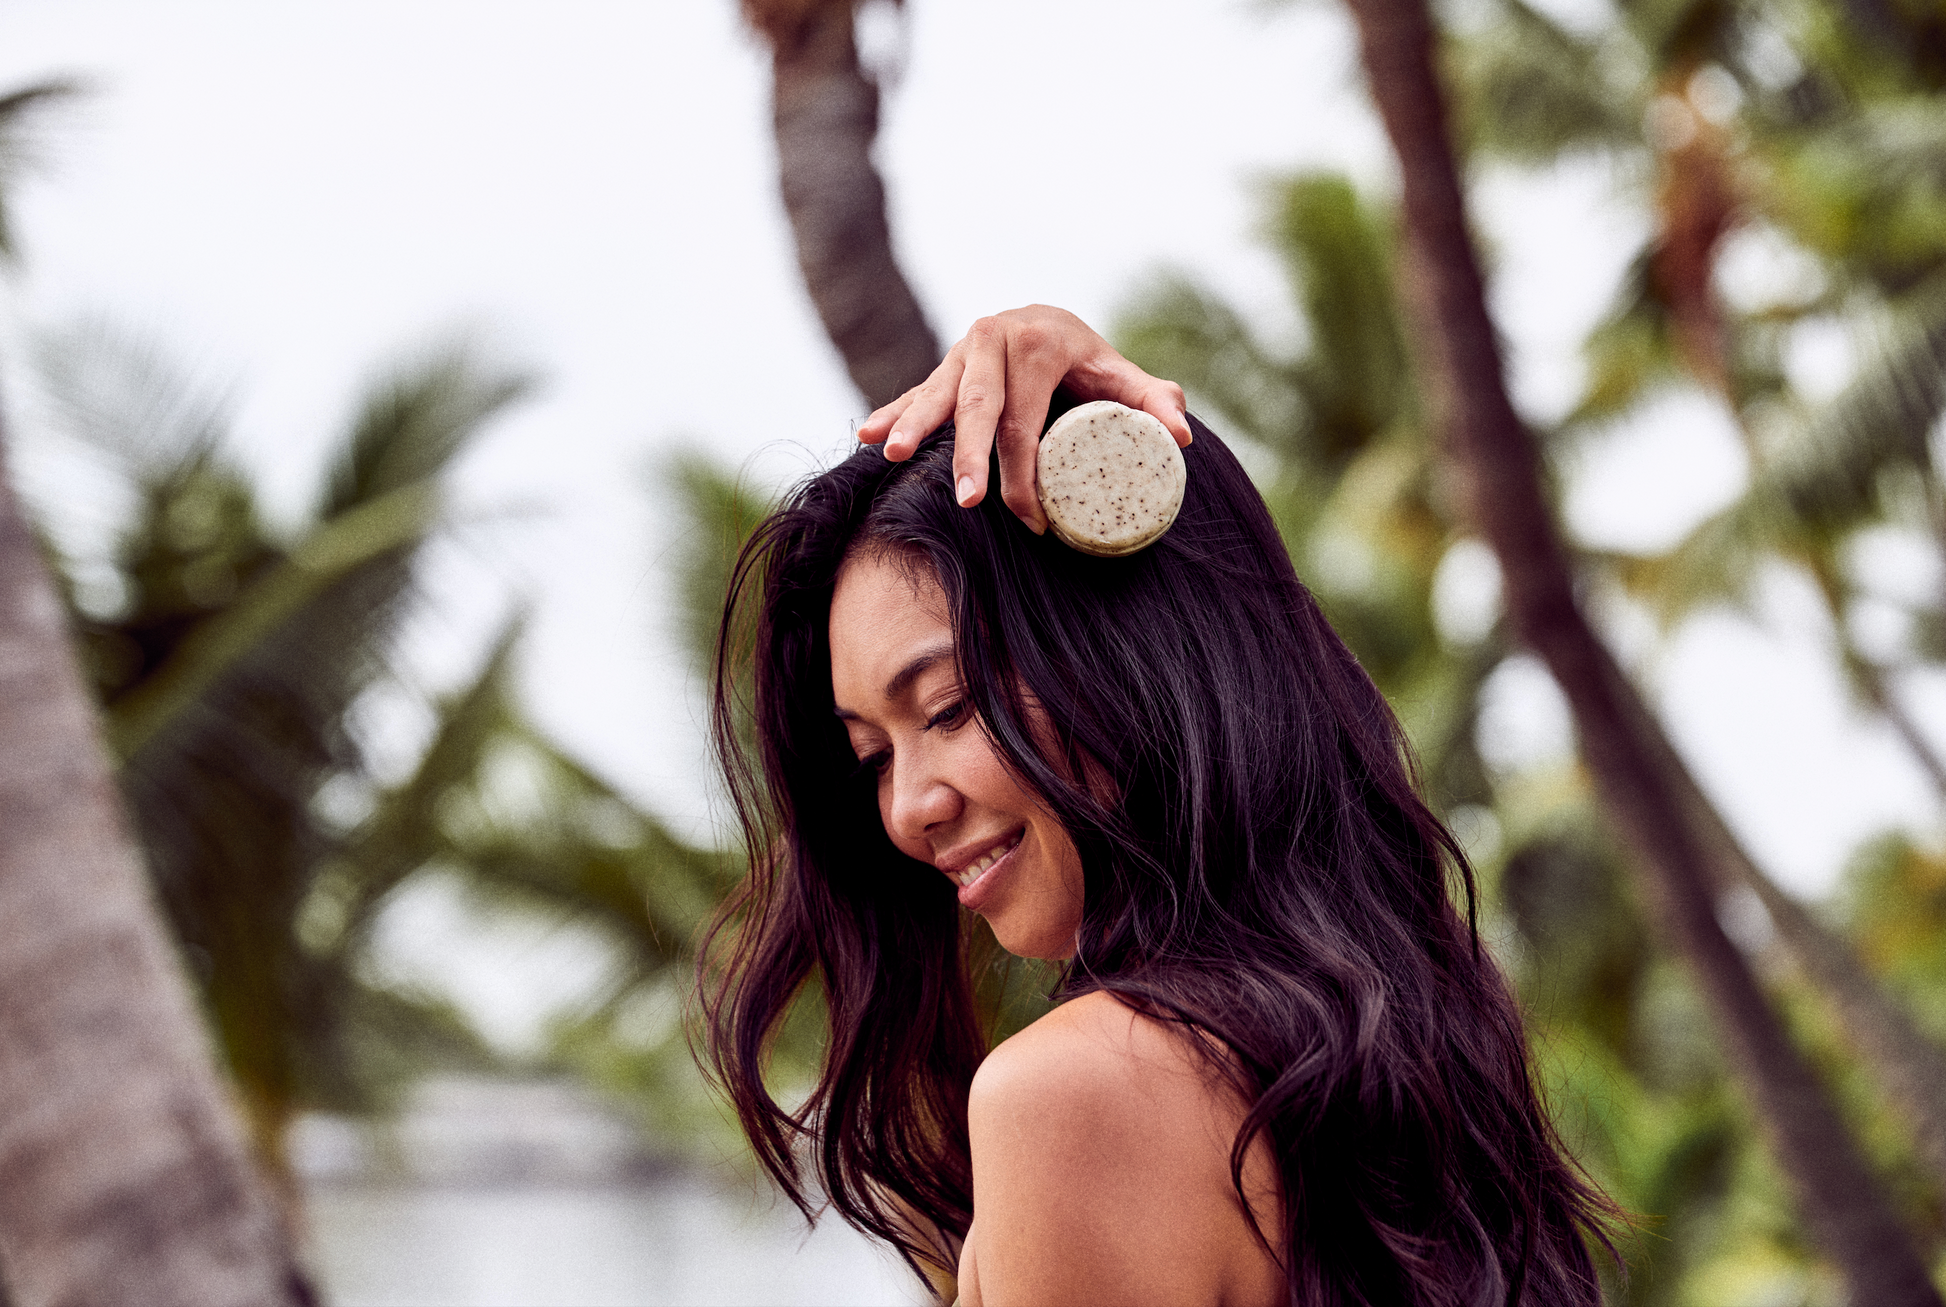 This image shows salon quality Shea Butter solid shampoo bars with plastic free biodegradable packaging for a more sustainable eco friendly zero waste hair care routine. Shown here is a woman holding one of the solid shampoo bars next to her hair before she washes